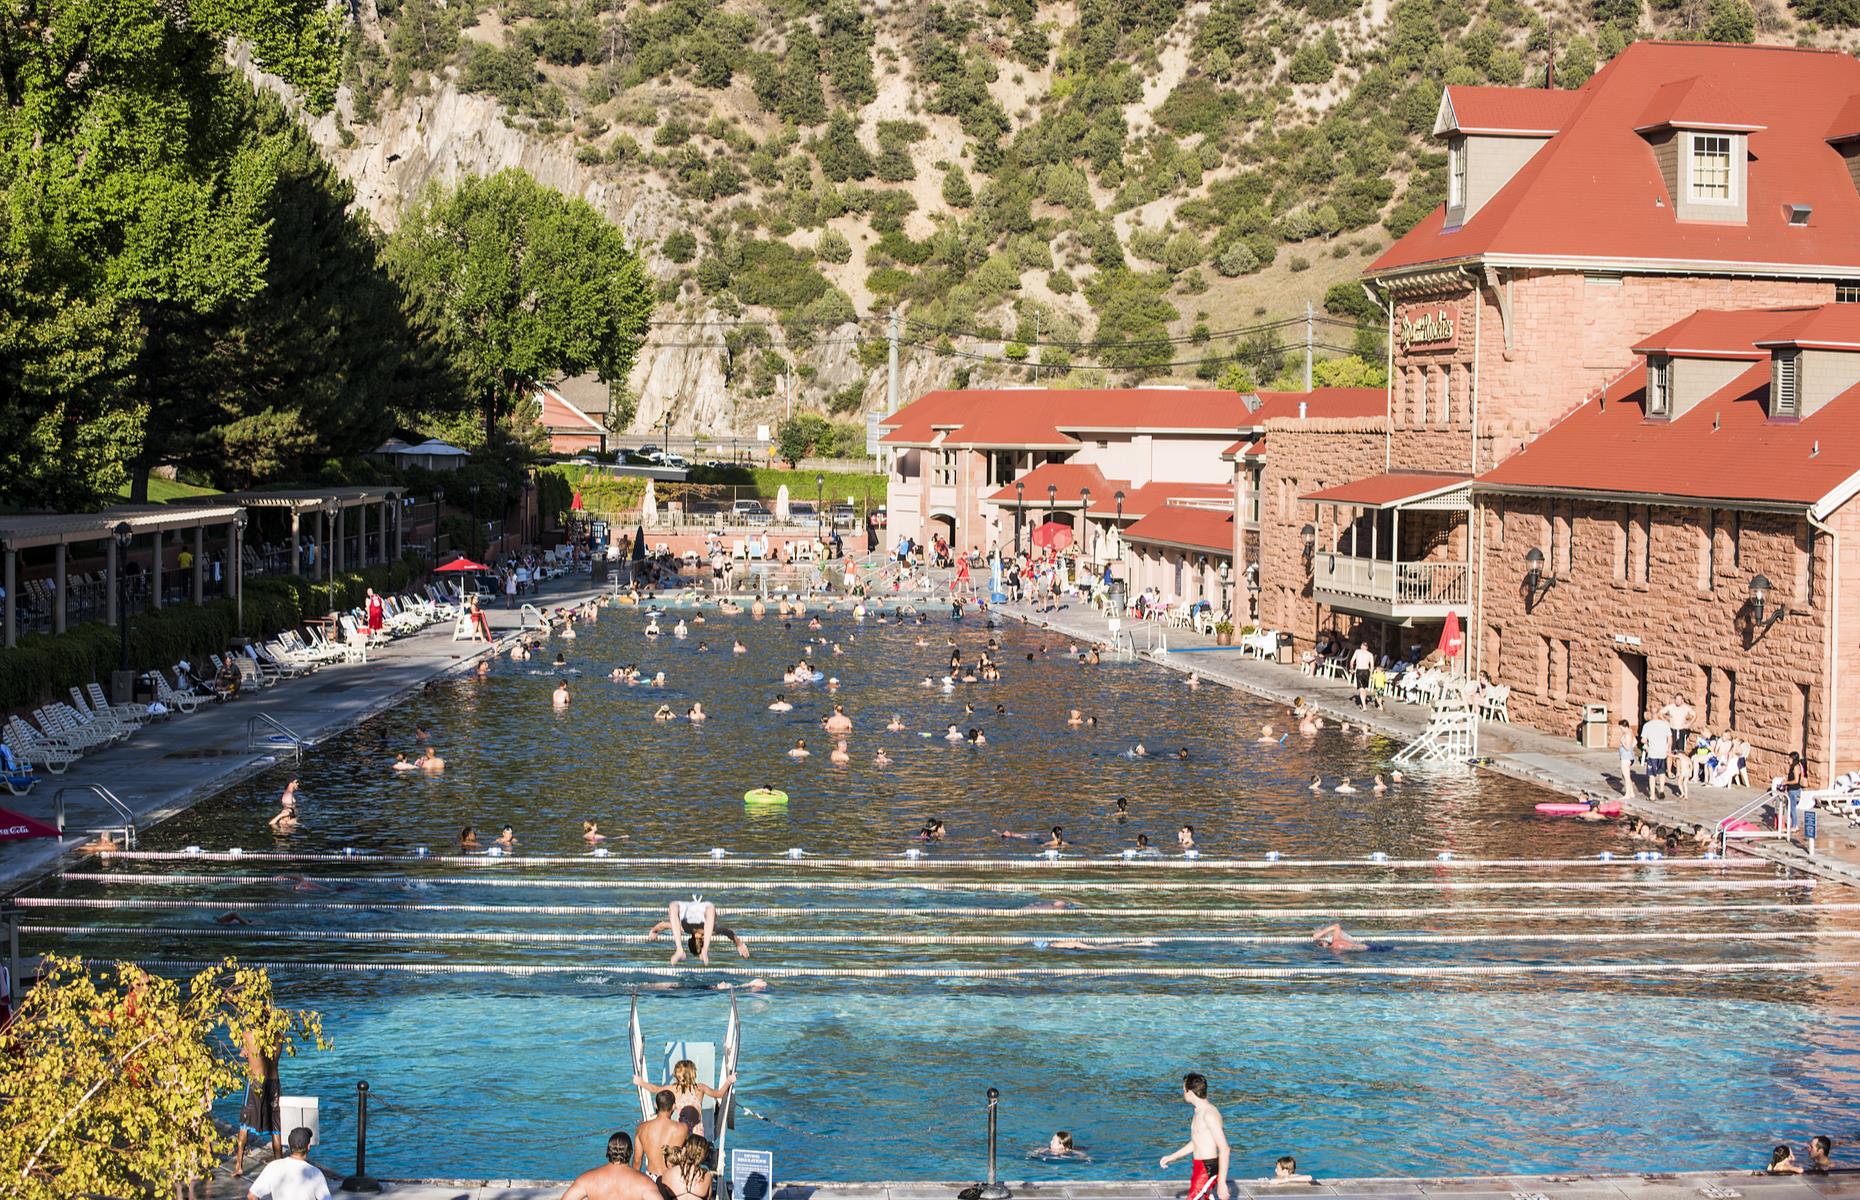 <p>Fancy a thermal-themed road trip? You can explore 19 of Colorado’s hot springs (there are over 30) from the Historic Hot Springs loop, a 720-mile (1,159km) route taking in some of the best in the state. Make sure you visit Glenwood Hot Springs, which is one of the world’s largest mineral baths and open year-round. The gigantic main pool contains a staggering one million gallons of water (at 32°C [90°F]), while the warmer therapy pool is 100 feet (30m) long.</p>